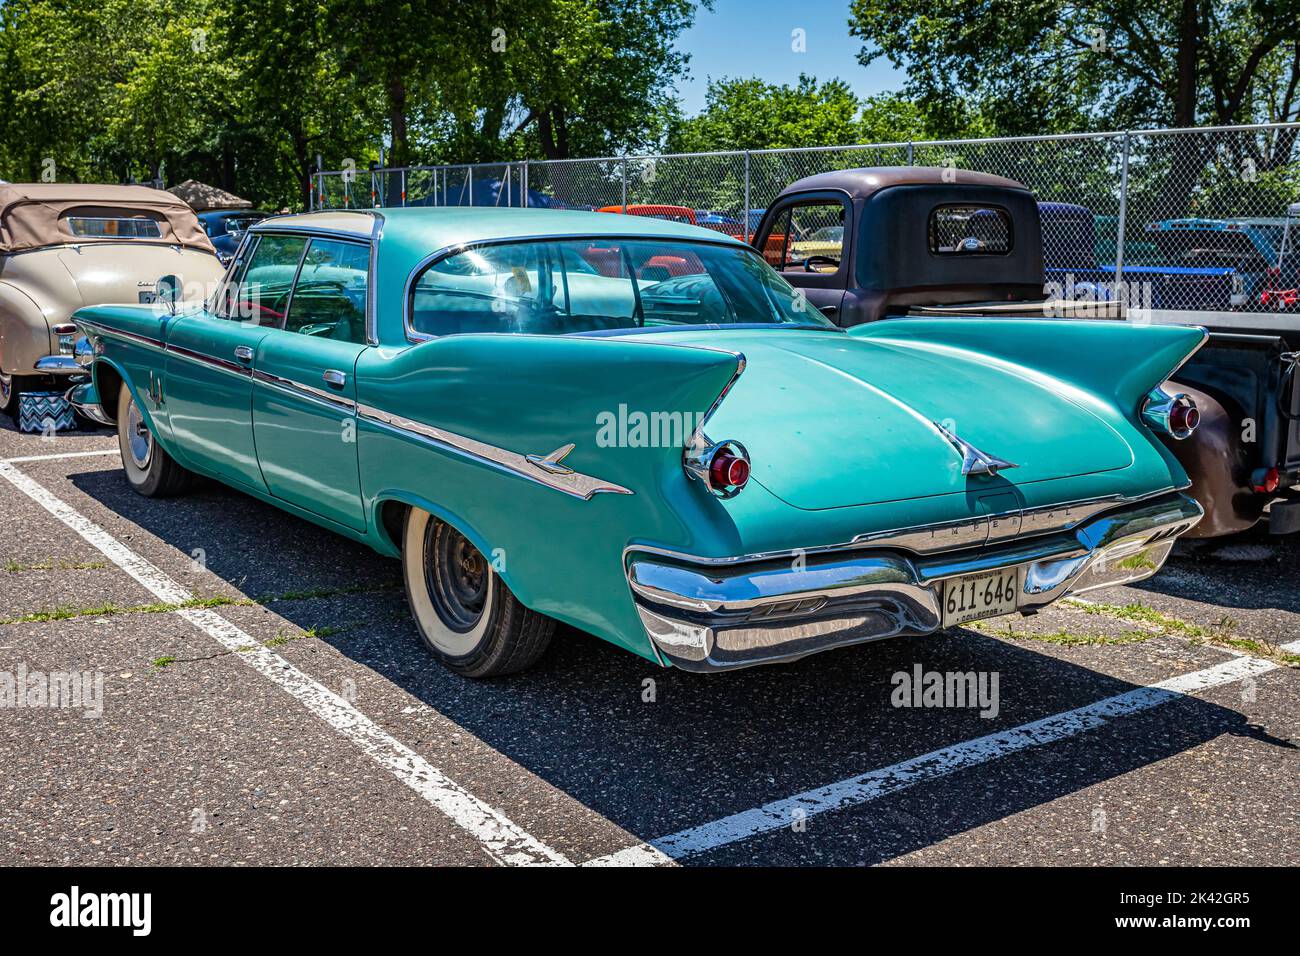 Falcon Heights, MN - June 18, 2022: High perspective rear corner view of a 1961 Chrysler Imperial Crown 4 Door Hardtop at a local car show. Stock Photo